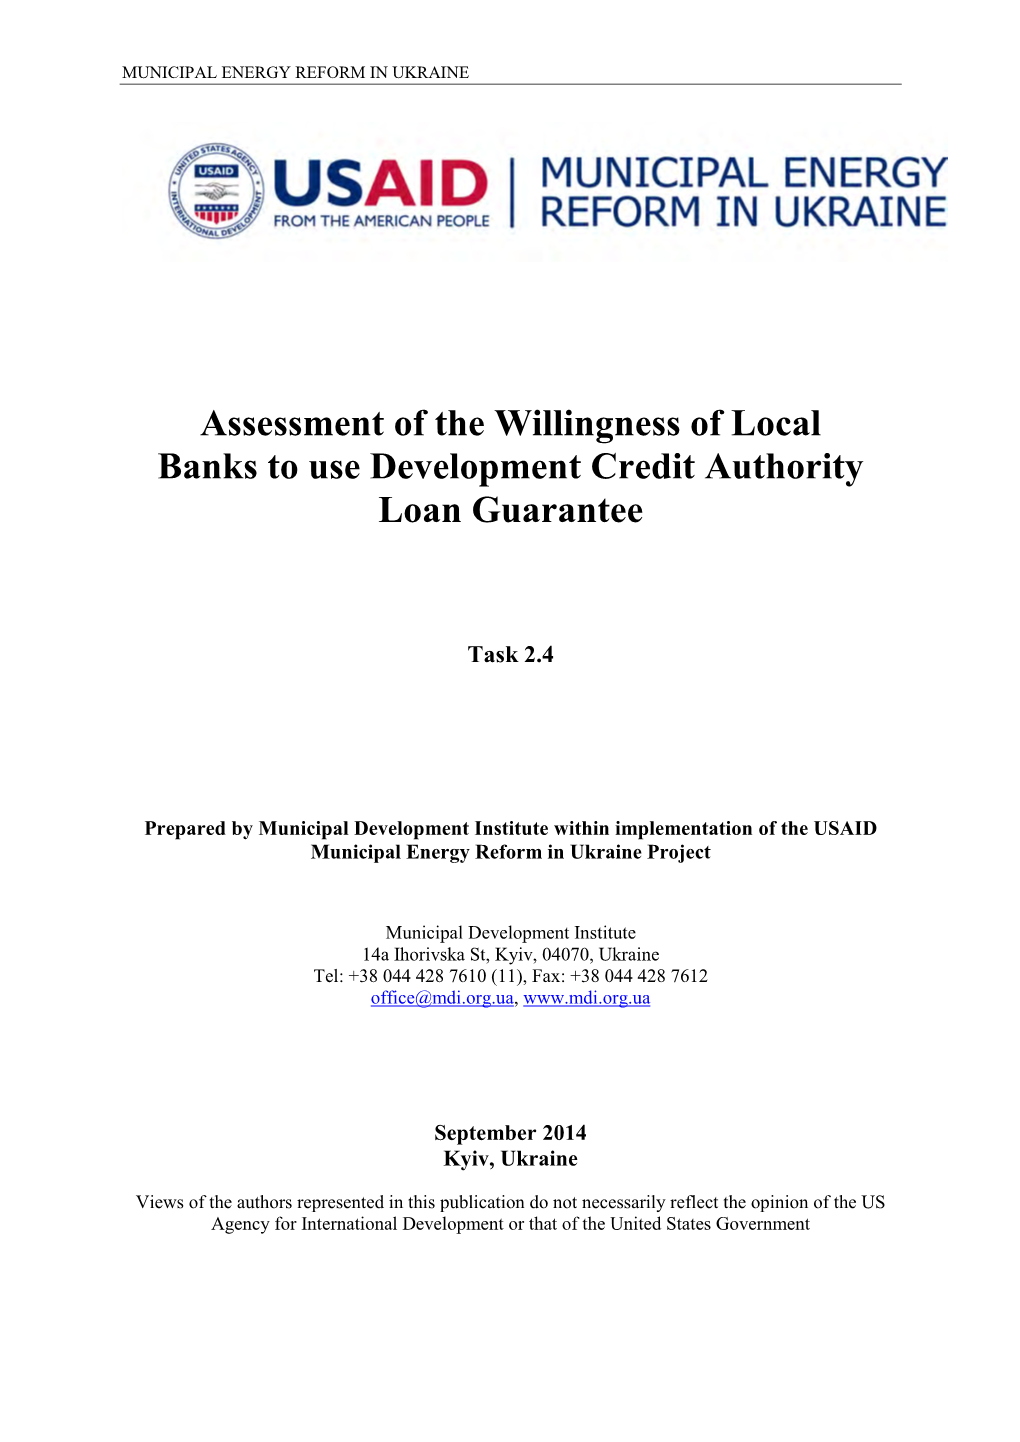 Assessment of the Willingness of Local Banks to Use Development Credit Authority Loan Guarantee